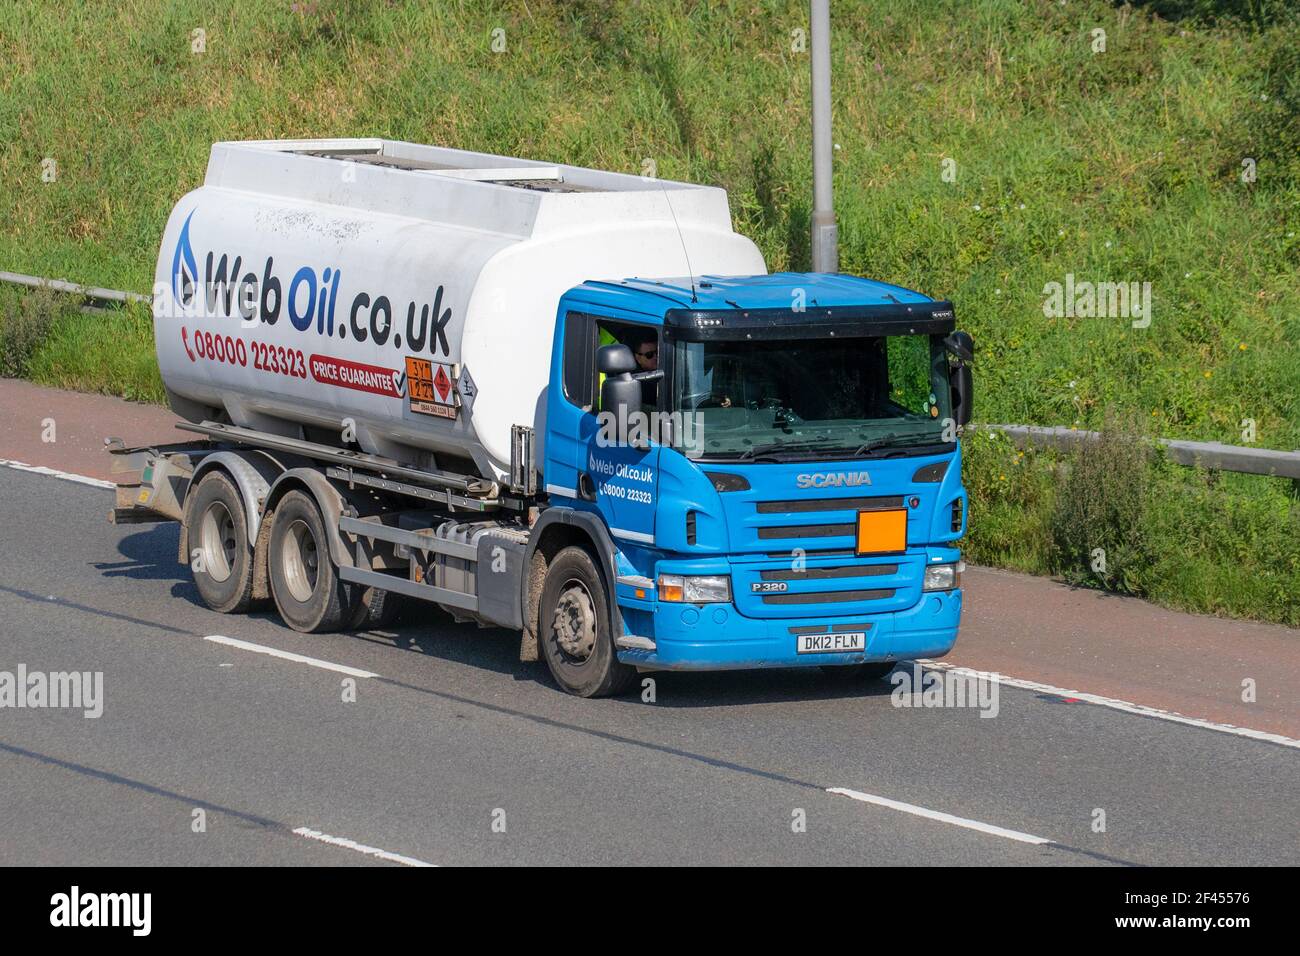 WebOil.com.uk heating oil trucks; Hazardous load haulage delivery trucks, lorry, heavy-duty vehicles, transportation, truck, cargo carrier, Scania P320 vehicle, European commercial transport industry HGV, M6 at Manchester, UK Stock Photo